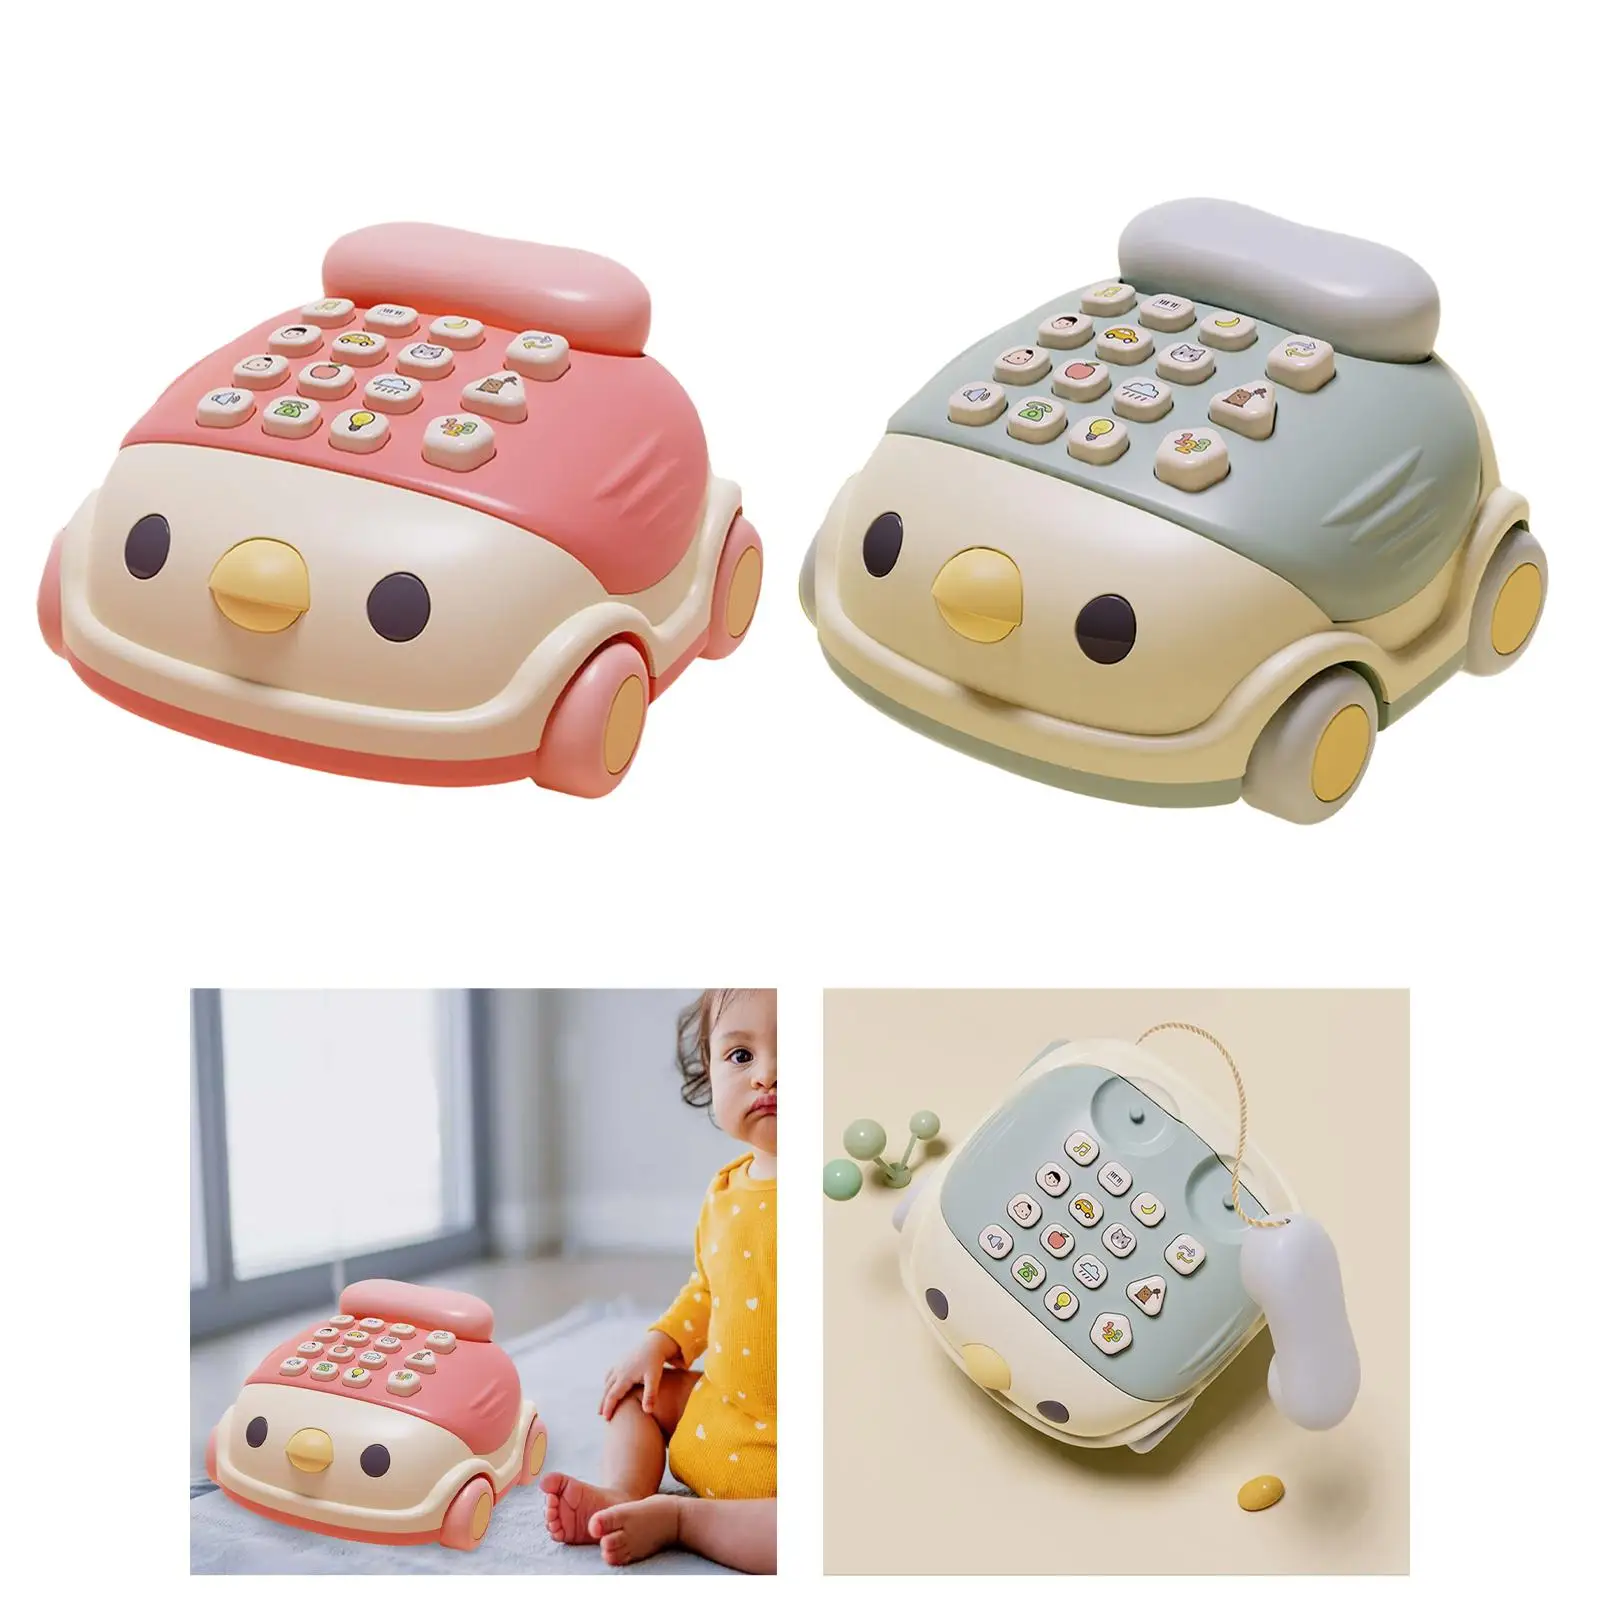 Creative Baby Telephone Toy Musical Toy 12 Function Enlightenment Education for Baby